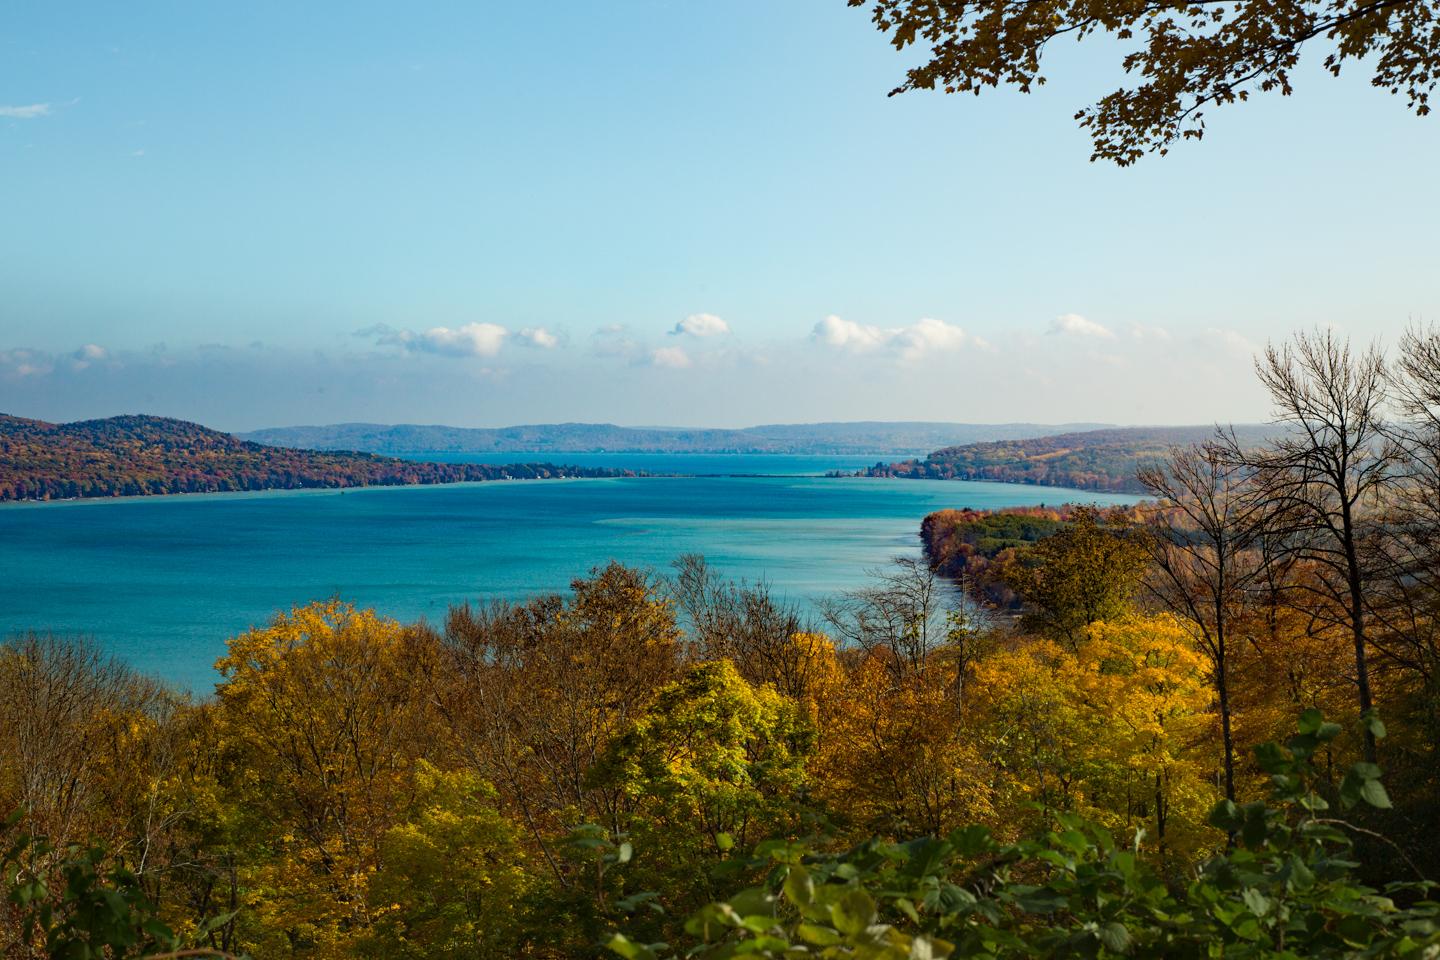 An overlook of two blue lakes surrounded by trees with fall leaves